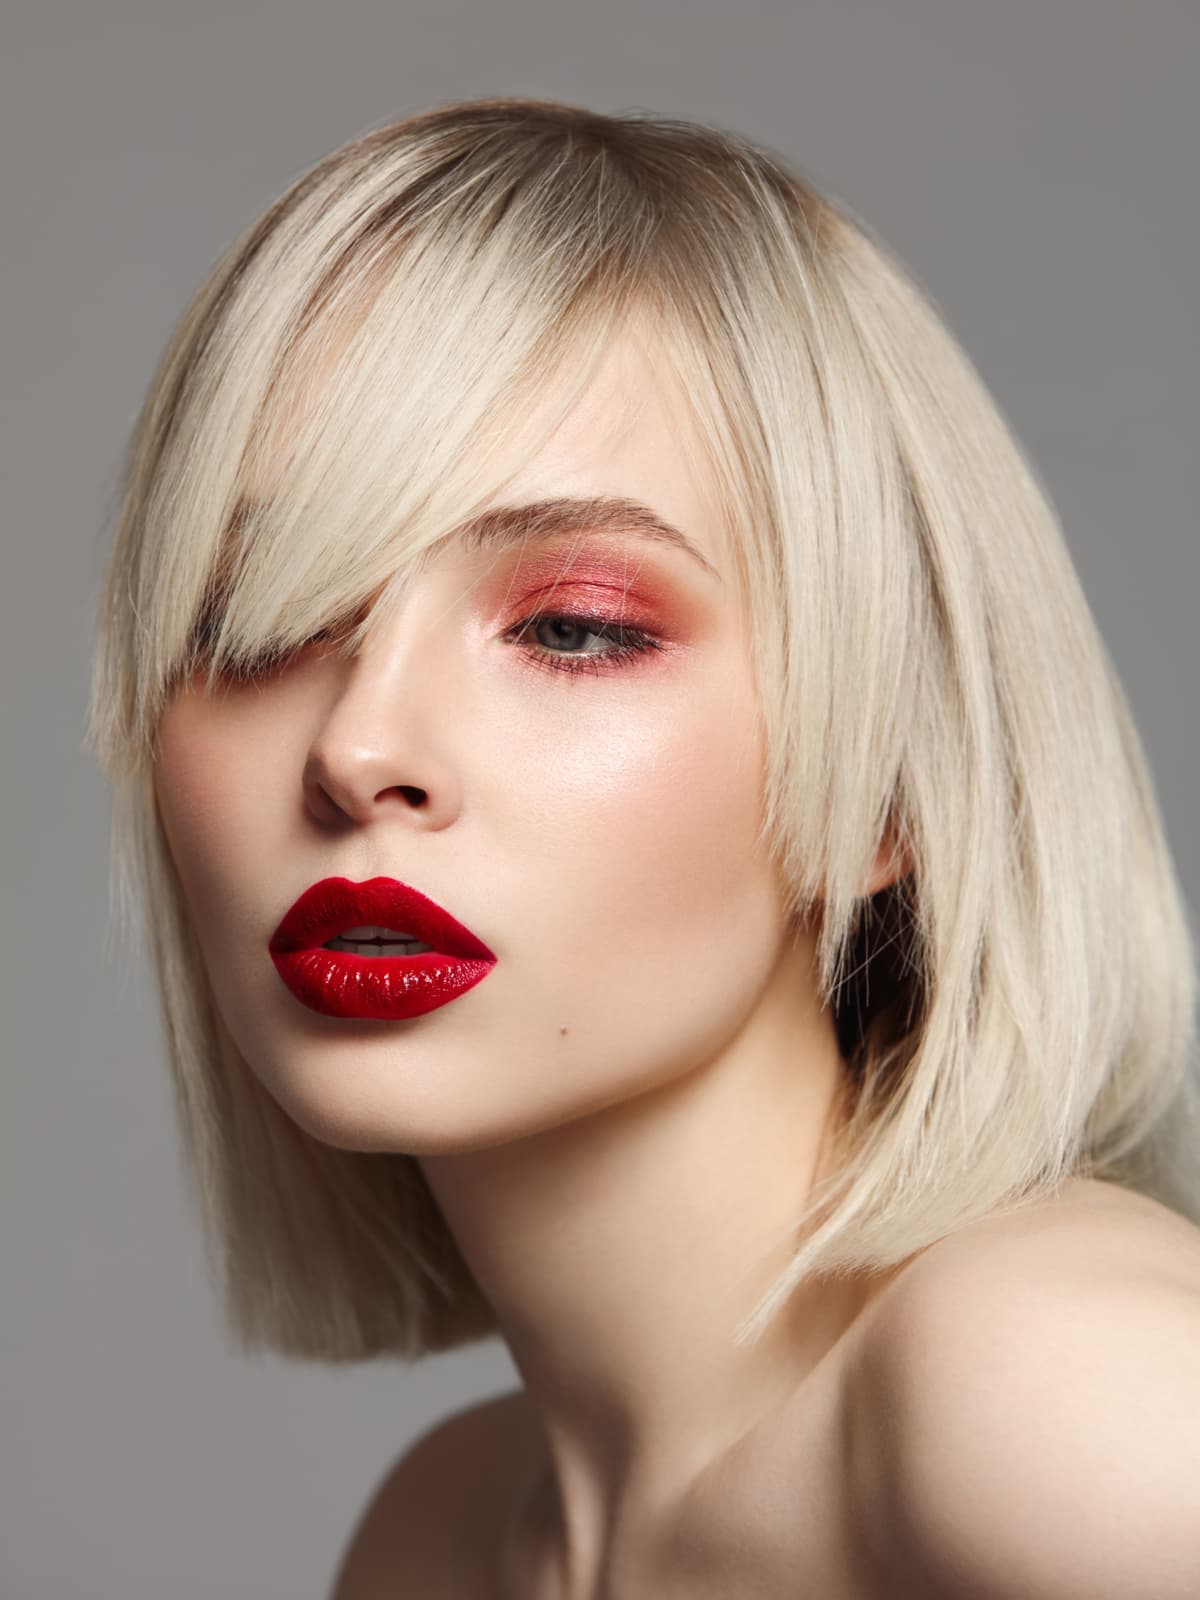 Studio portrait of beautiful woman with bright professional make-up and bob haircut